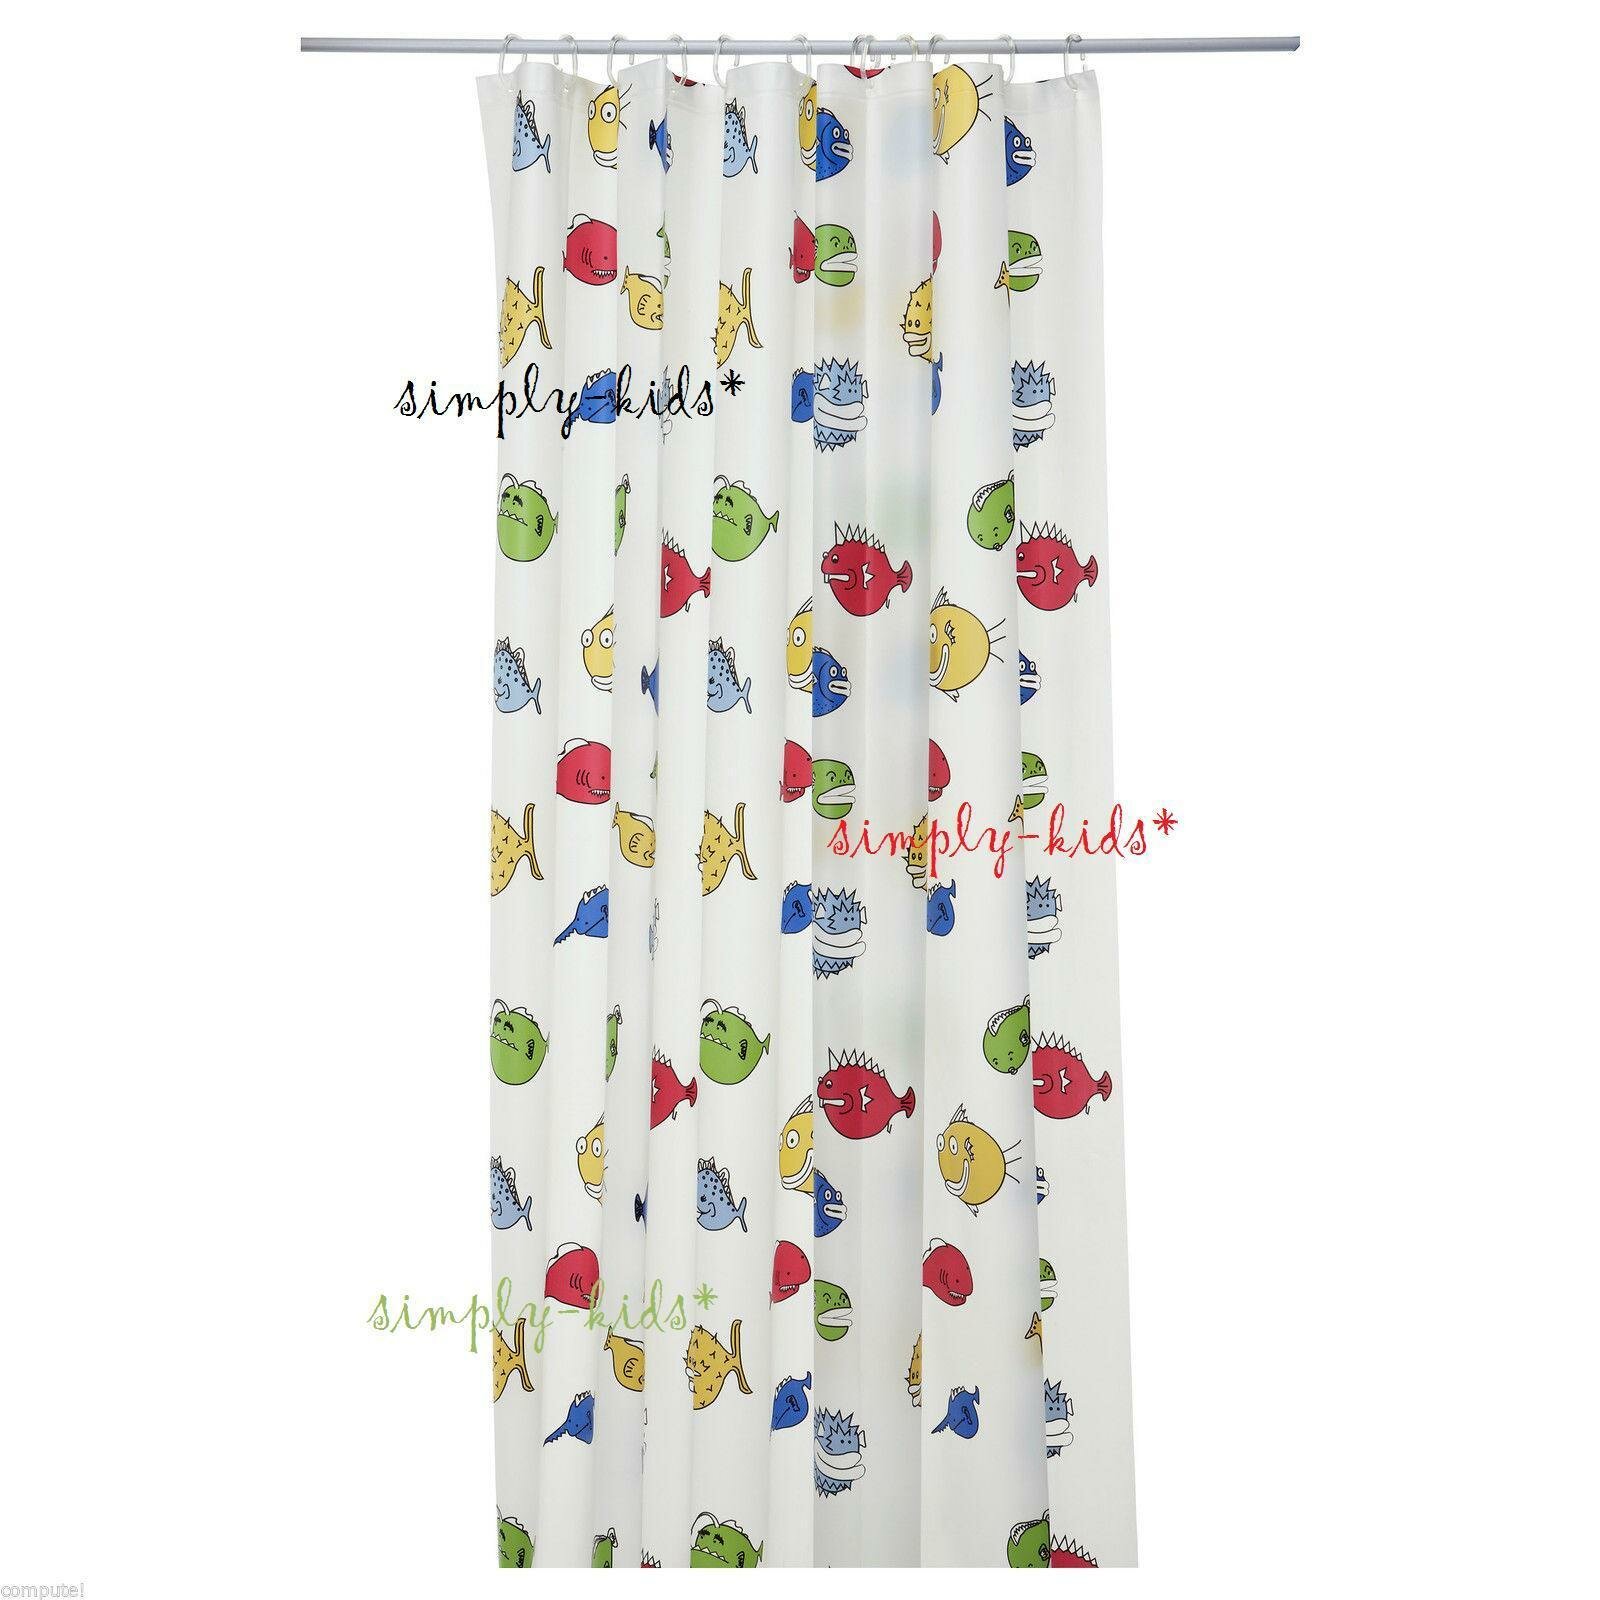 Ikea Shower Curtain for Best Your Bathroom Decoration: Shower Curtain Height | Ikea Shower Curtain | Shower Curtains 80 Inches Long